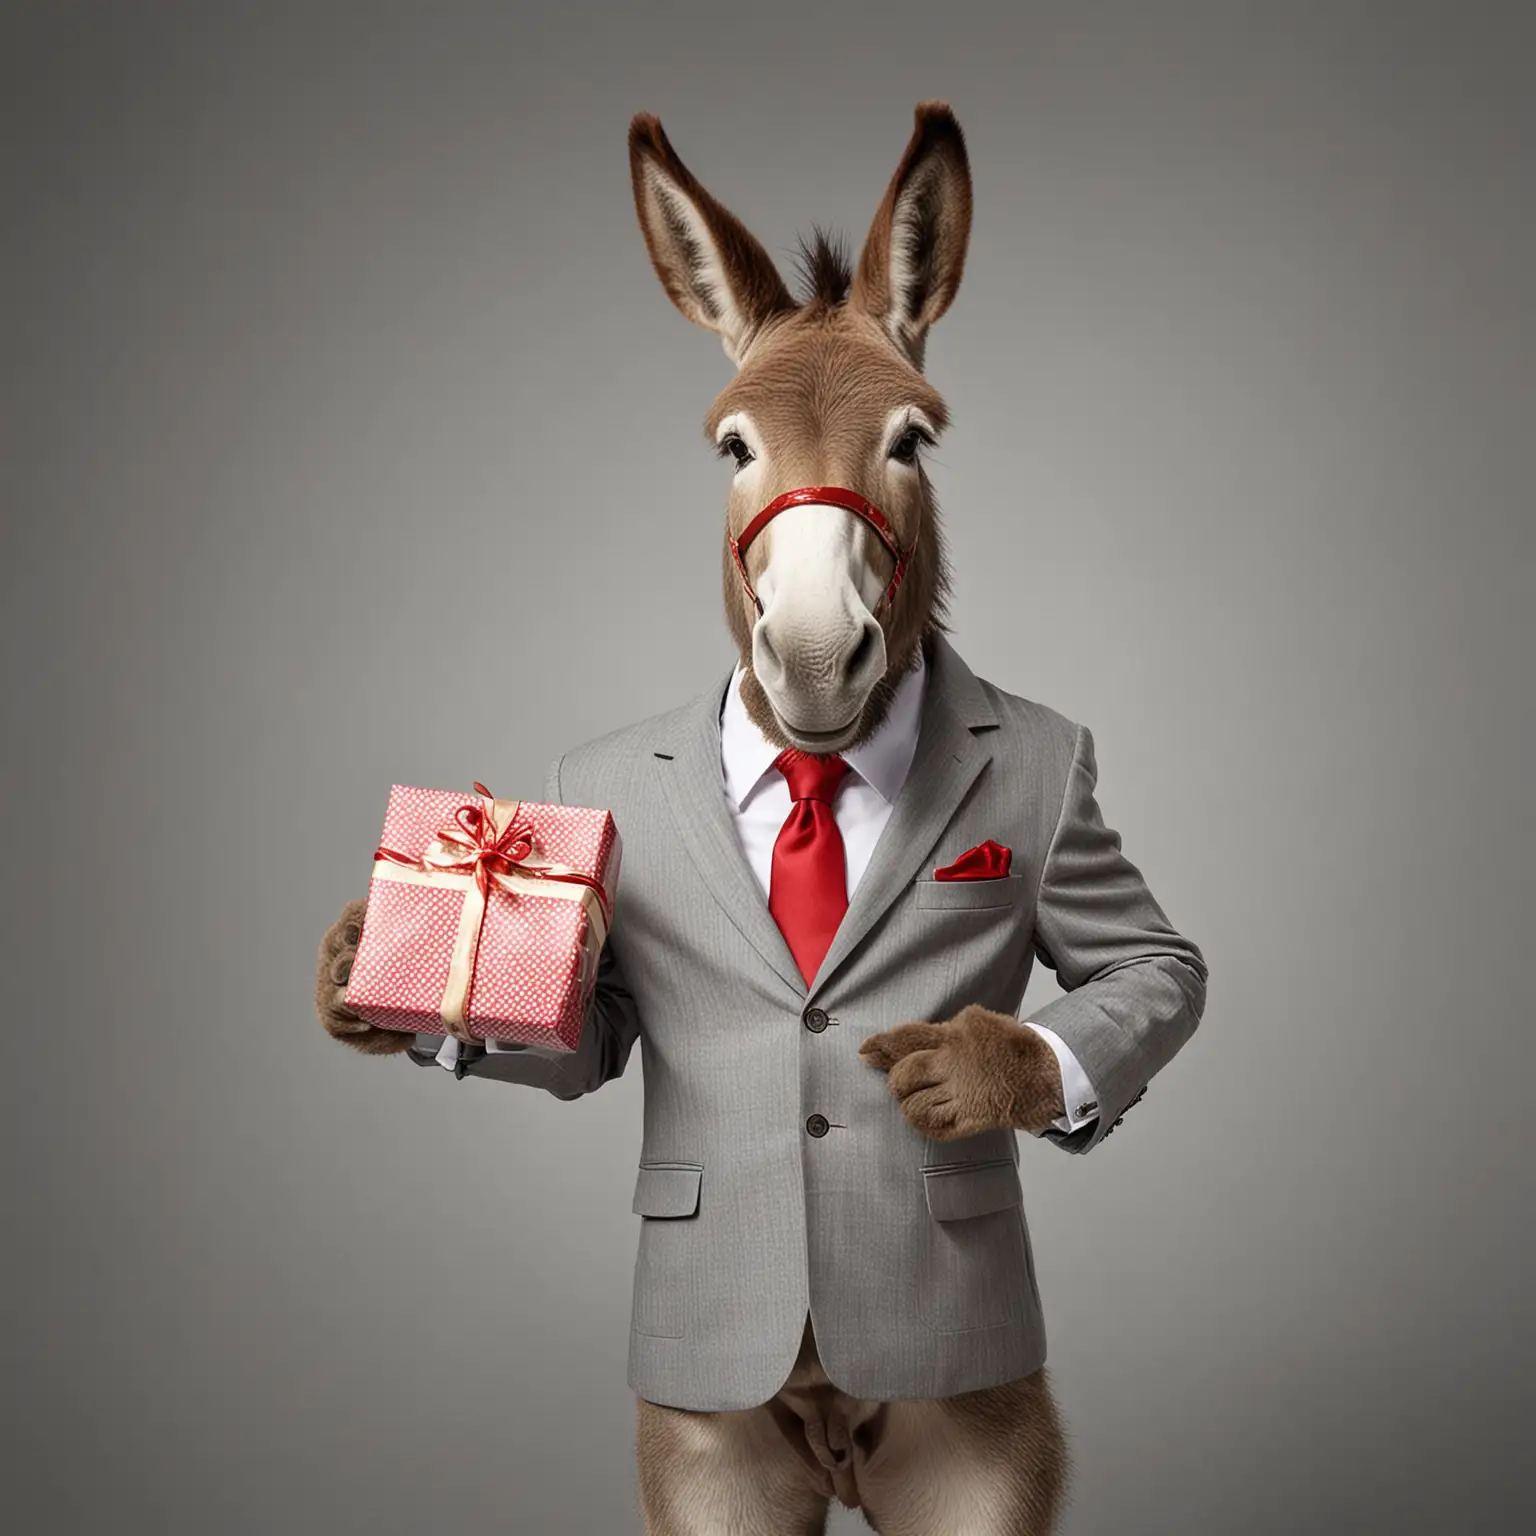 Donkey in suit give a present